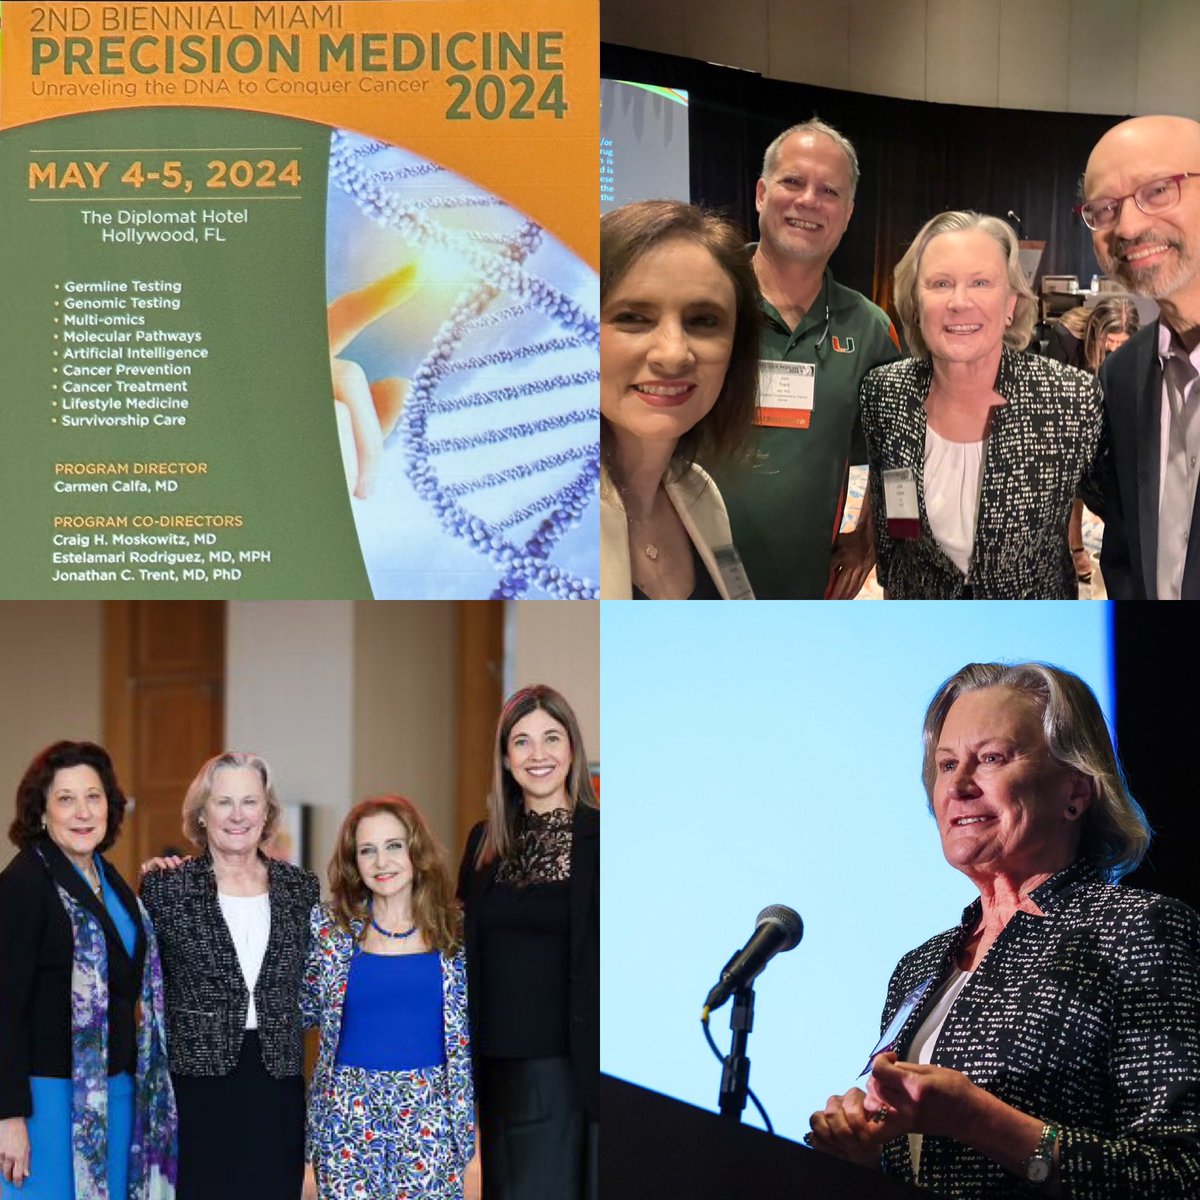 Fantastic @UMiamiHealth @SylvesterCancer Precision Oncology conference this weekend organized by @CarmenCalfa! Great to catch up with so many friends and colleagues @FeliciaKnaul @hoperugo @DrDebuTripathy @JTrentMDPhD @atperez_md